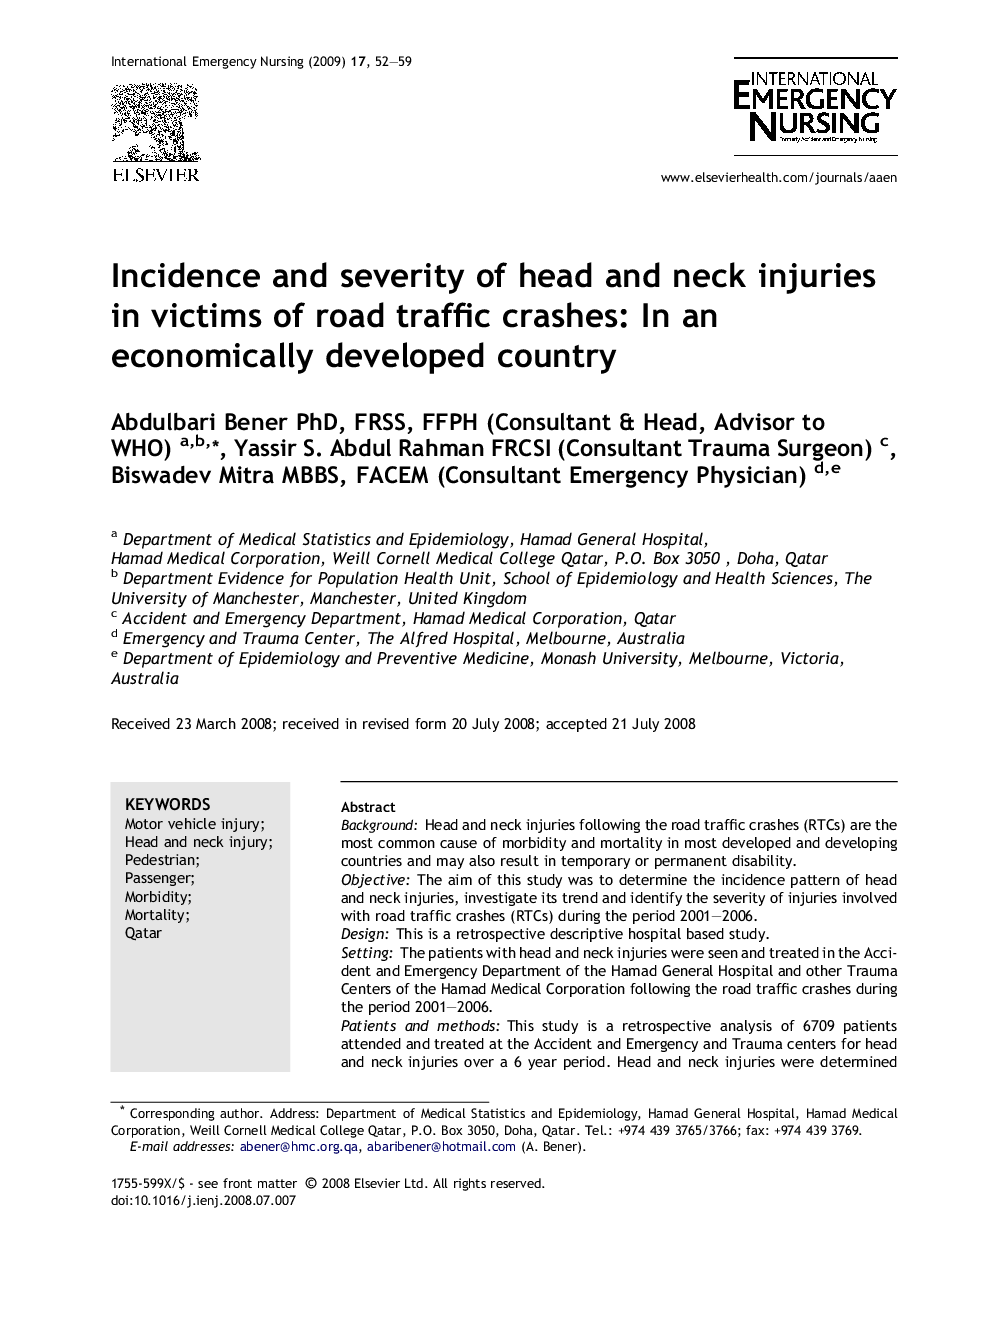 Incidence and severity of head and neck injuries in victims of road traffic crashes: In an economically developed country